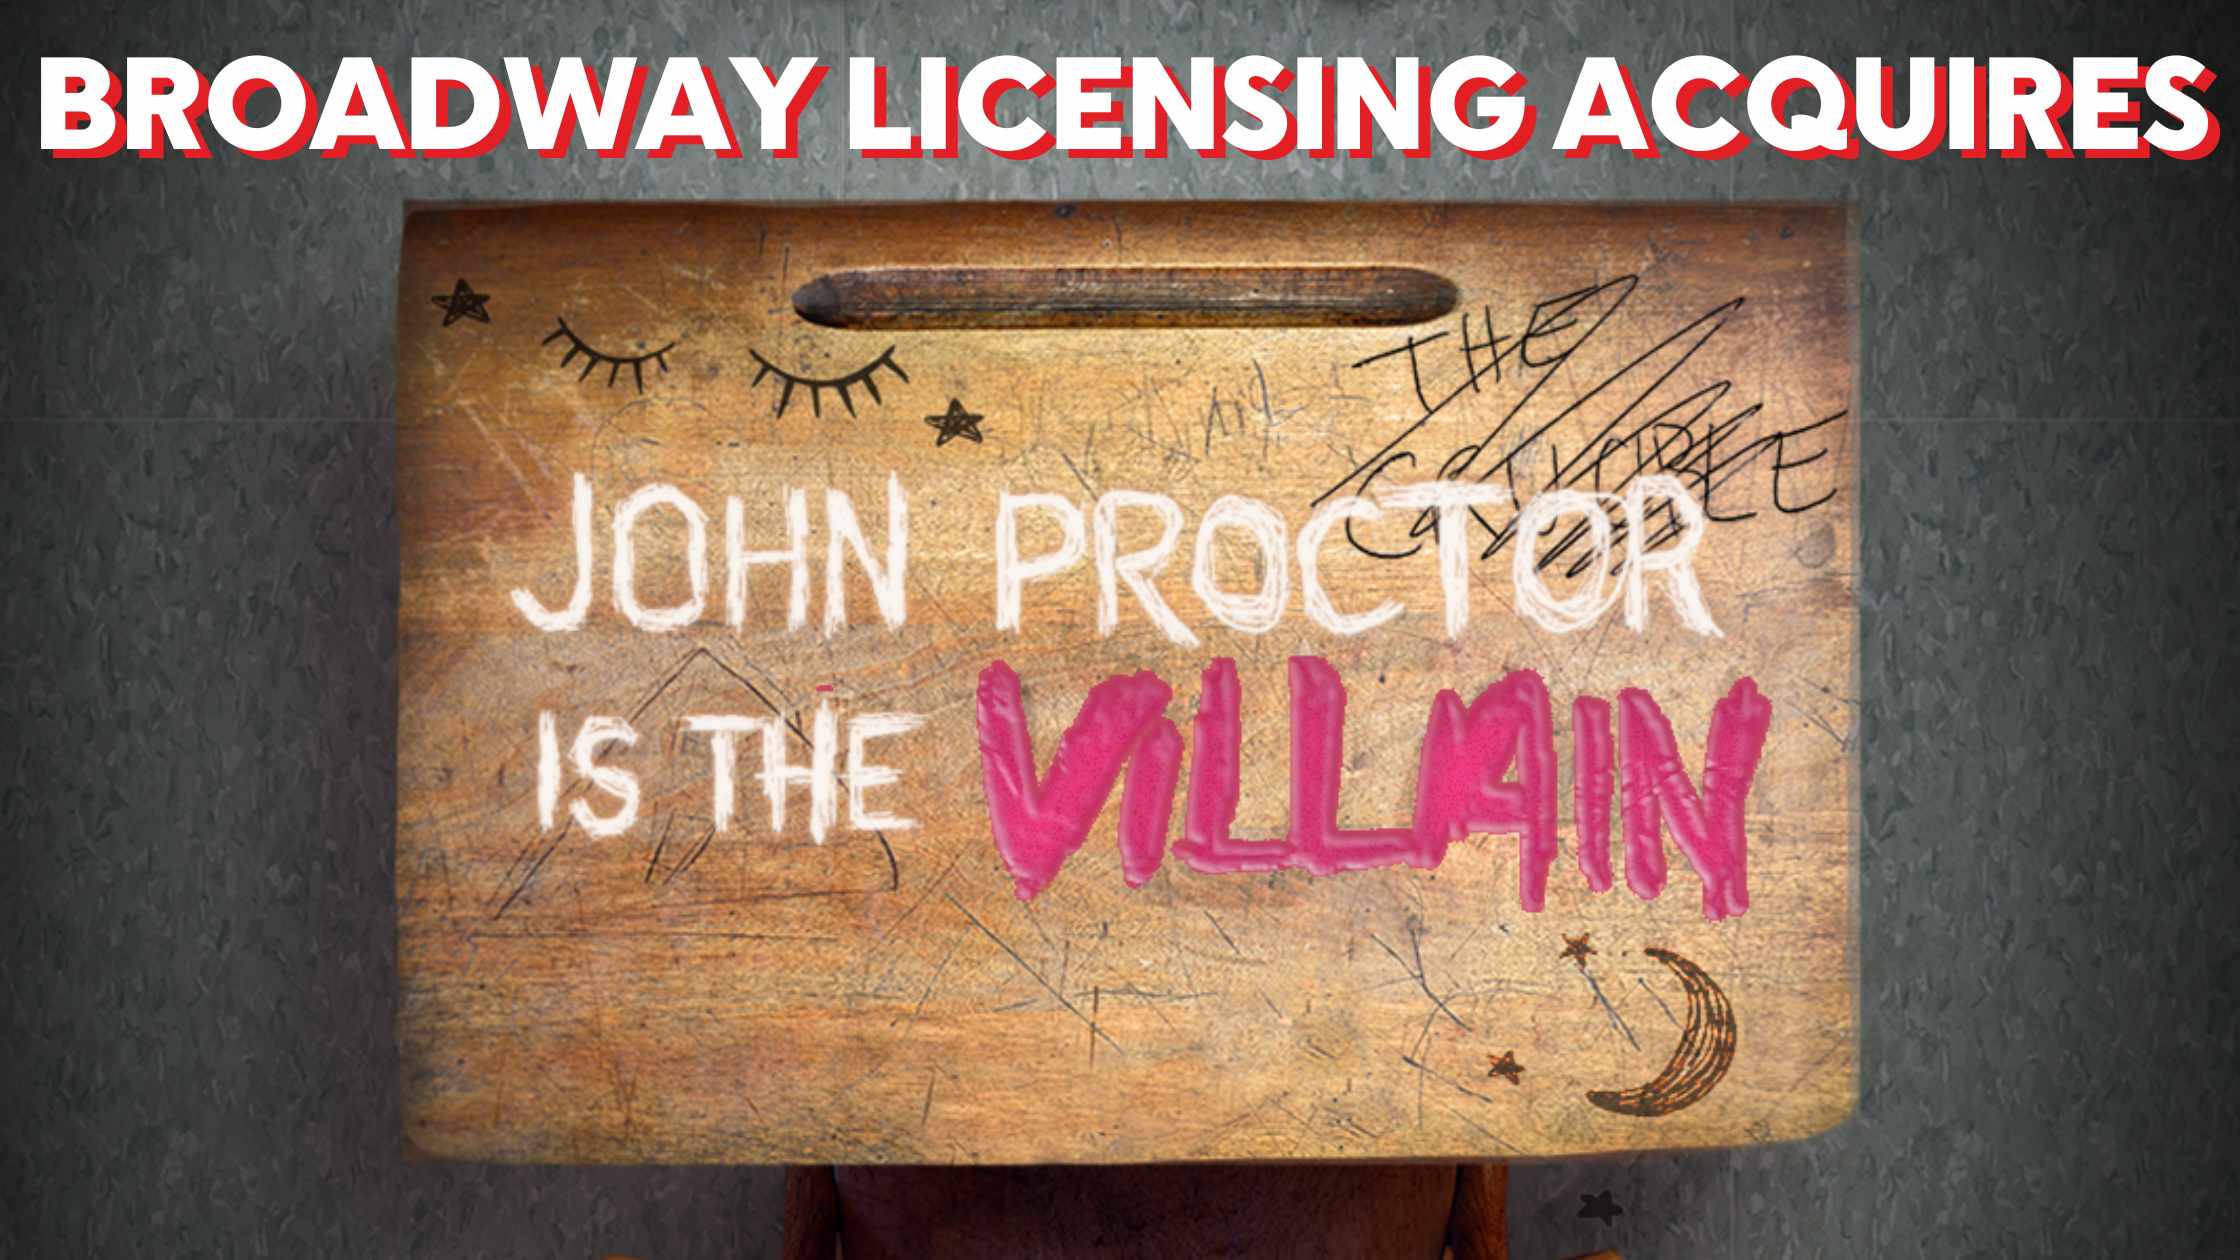 Broadway Licensing Acquires Highly Anticipated New Play “John Proctor Is the Villain” picture image pic